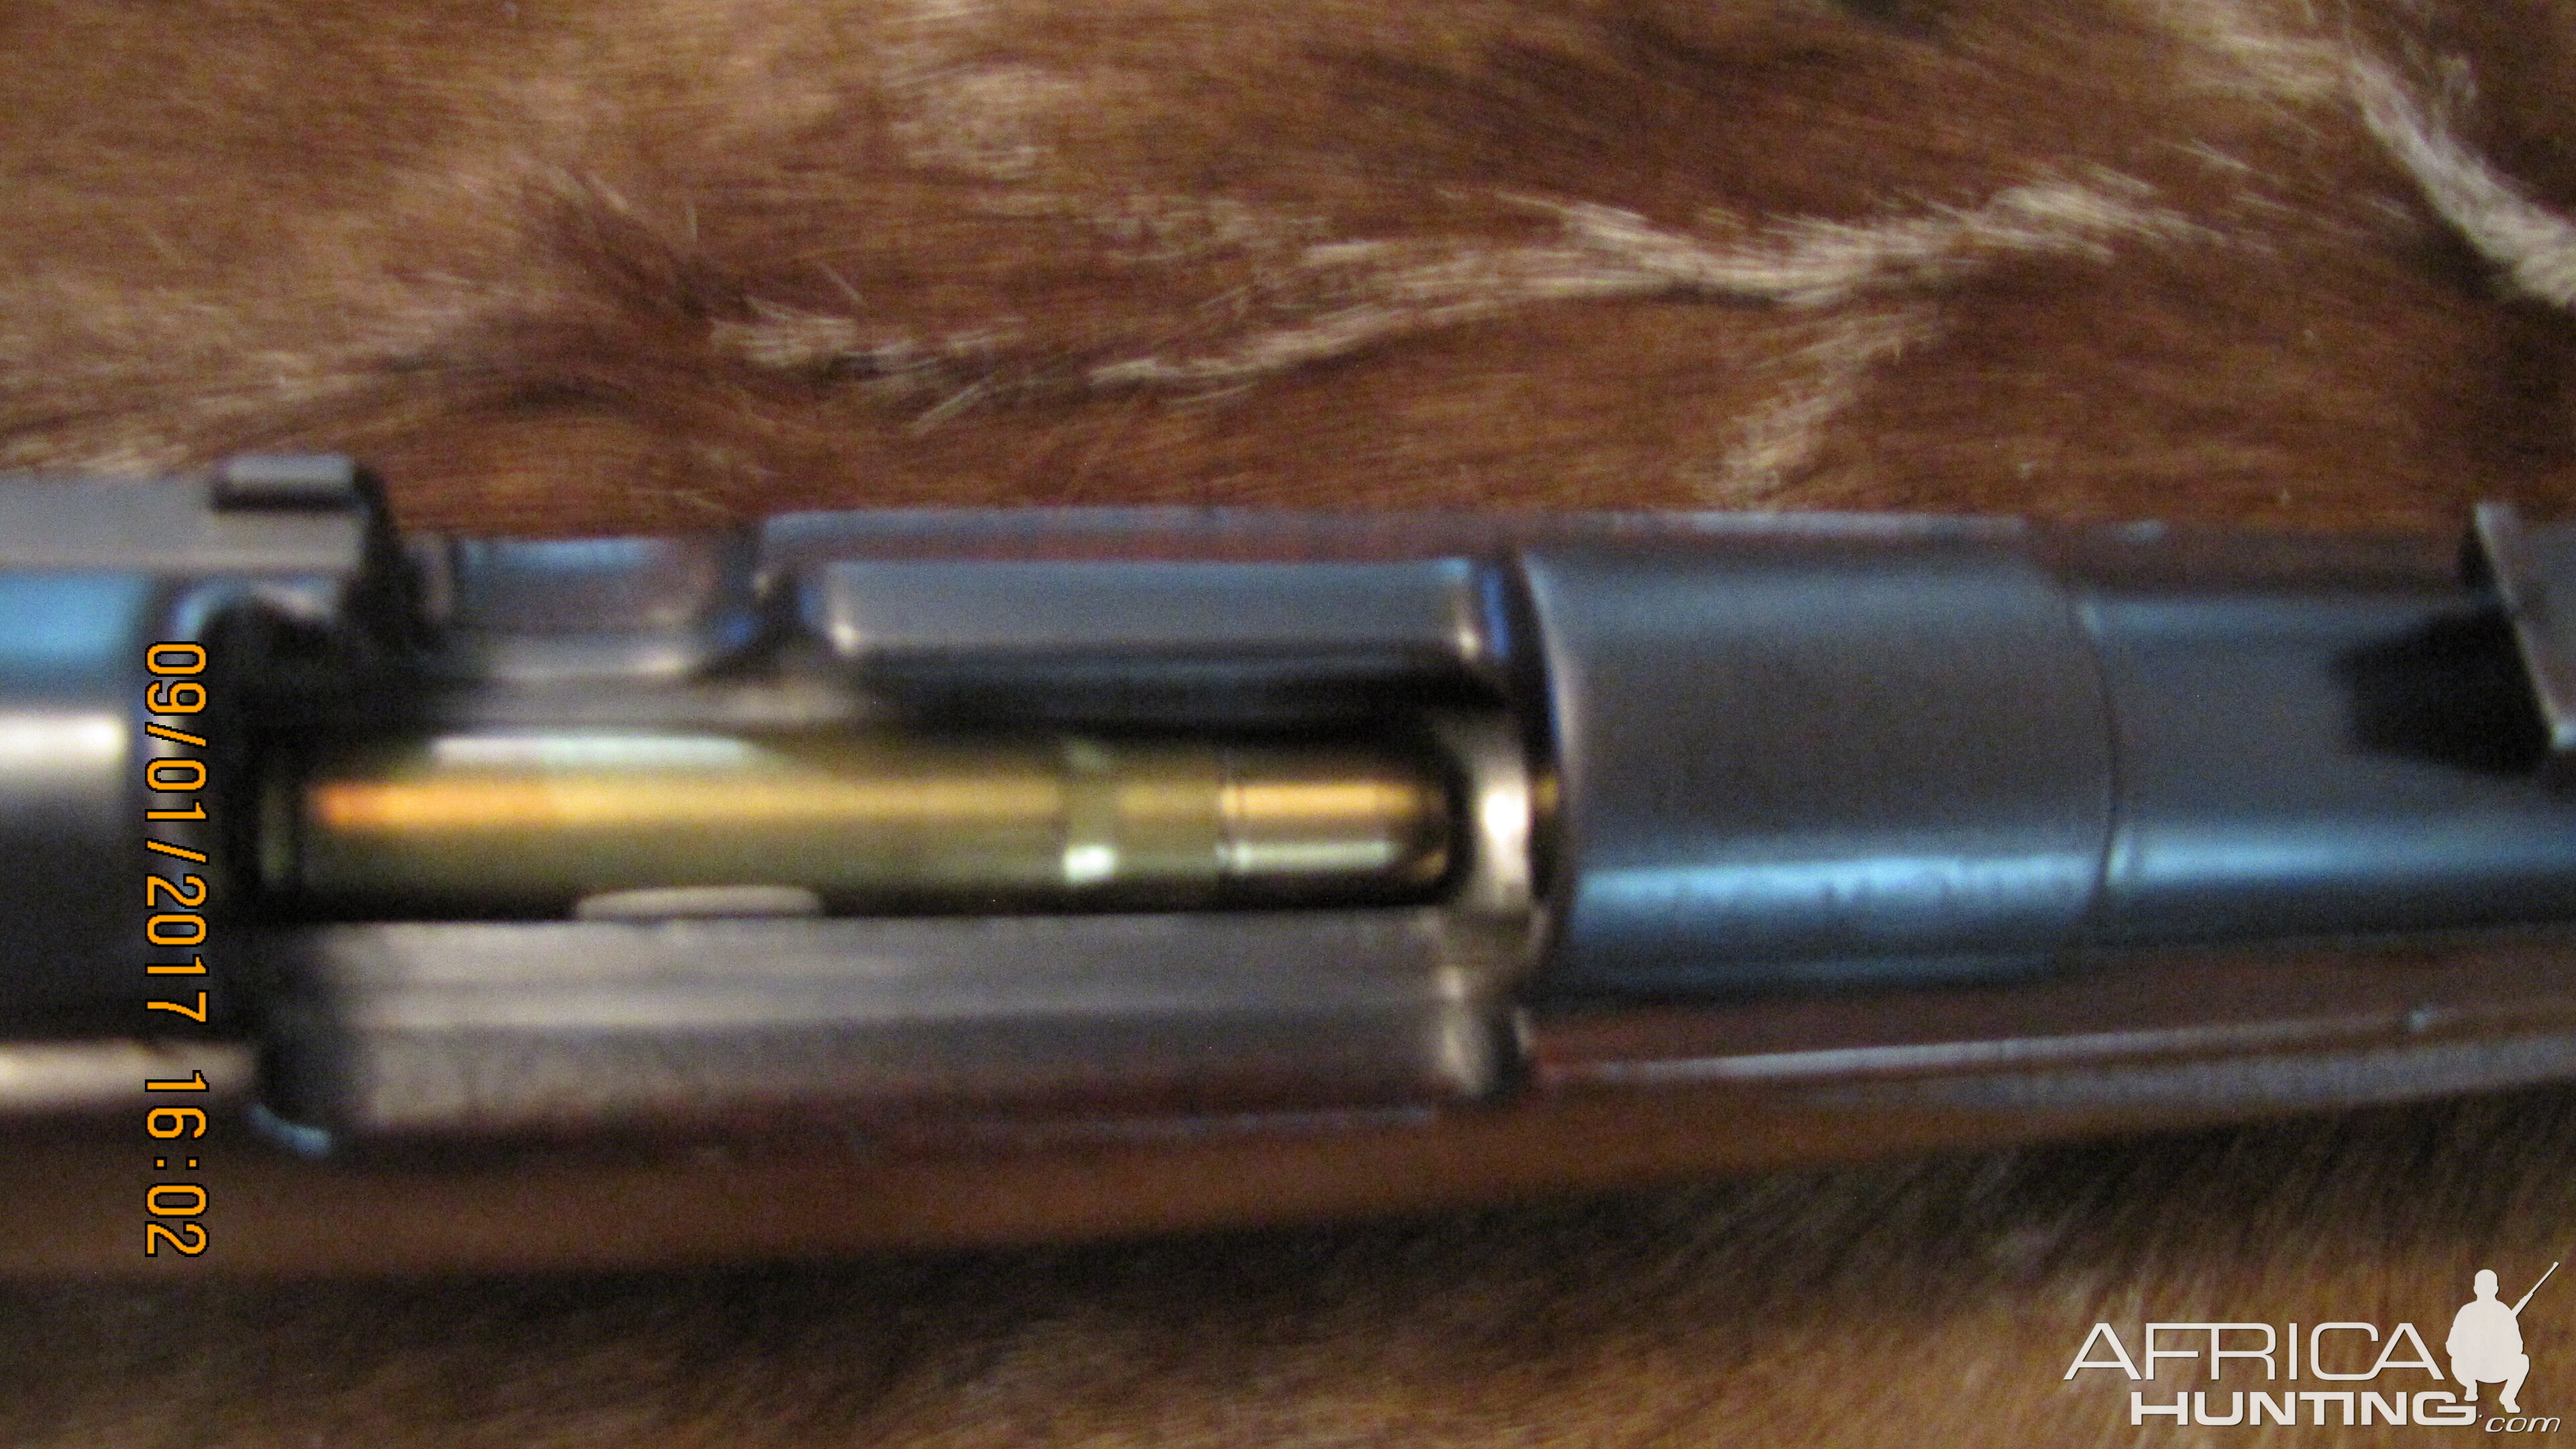 August Schuler Rifle chambered in a 500 Schuler